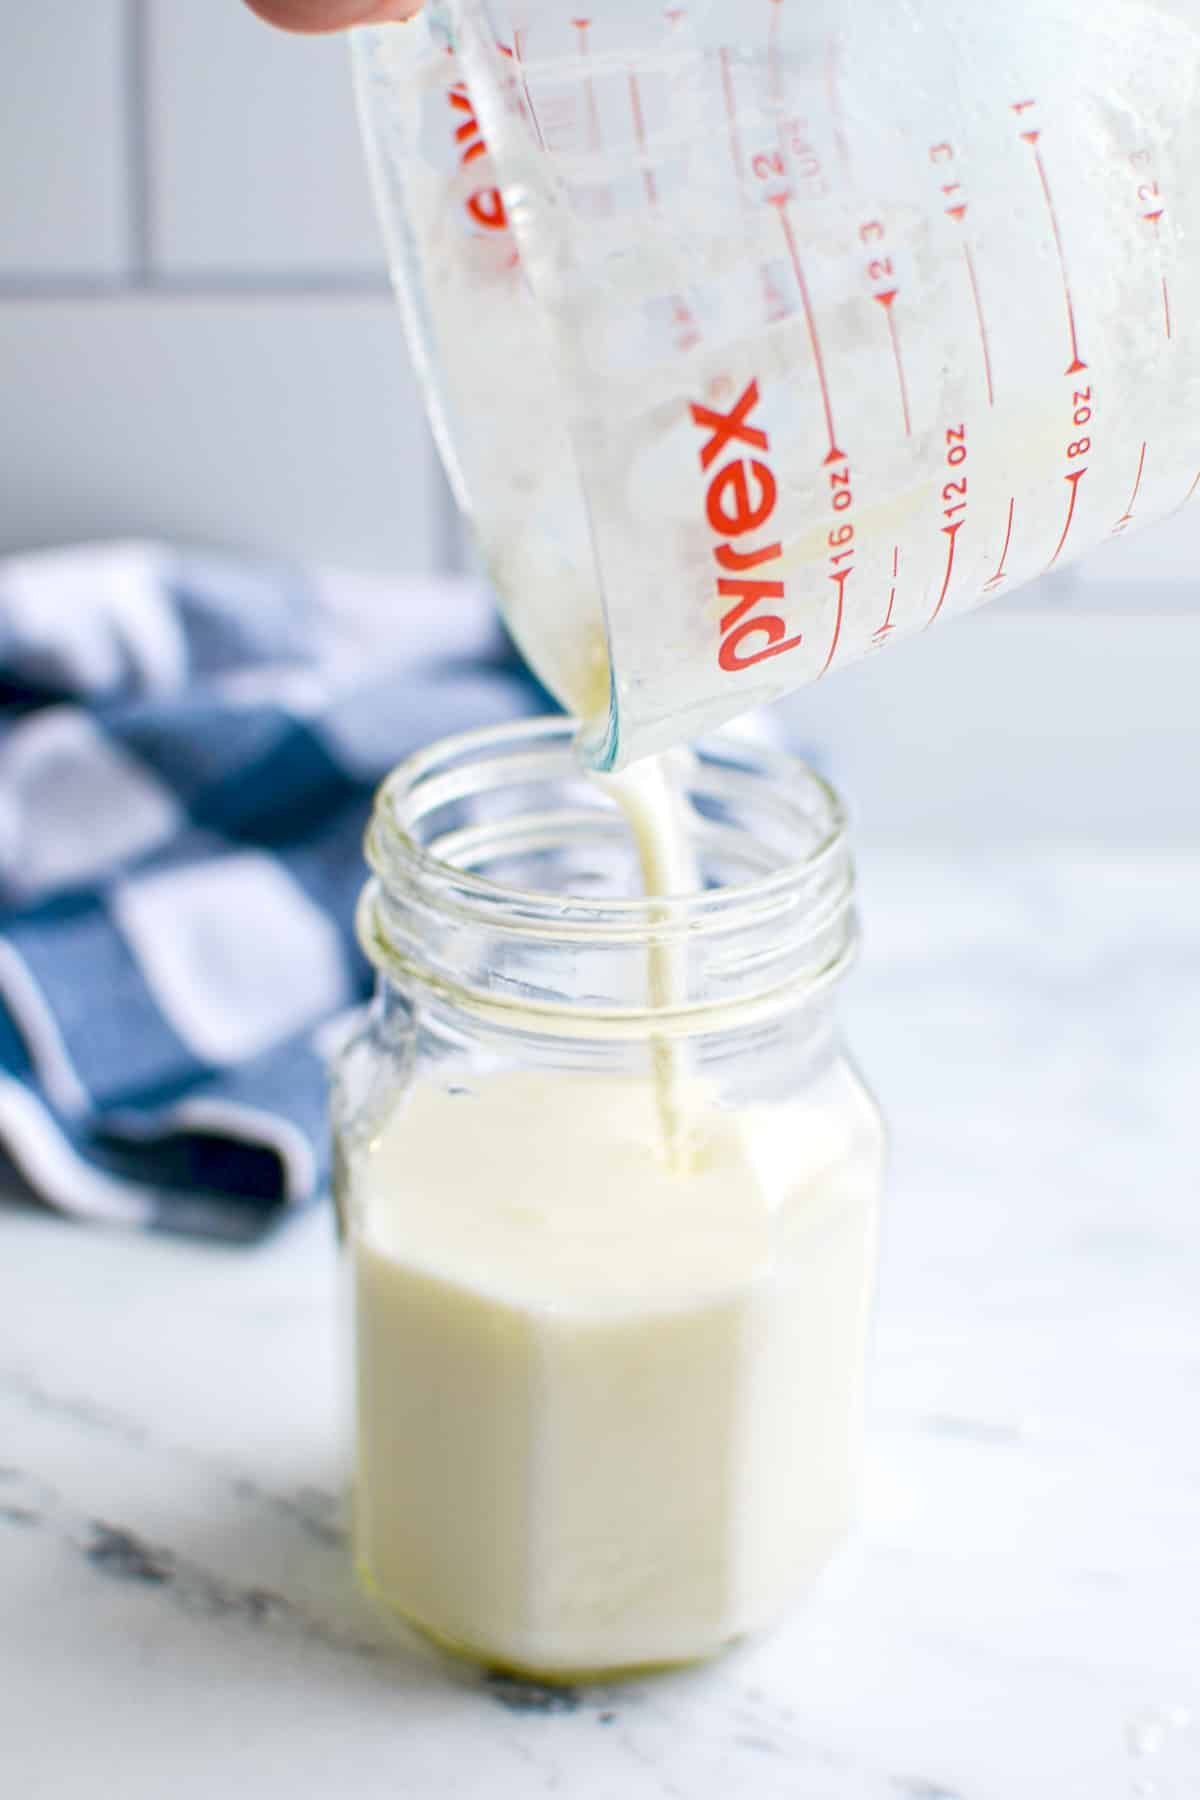 A jar with kefir being poured into it.